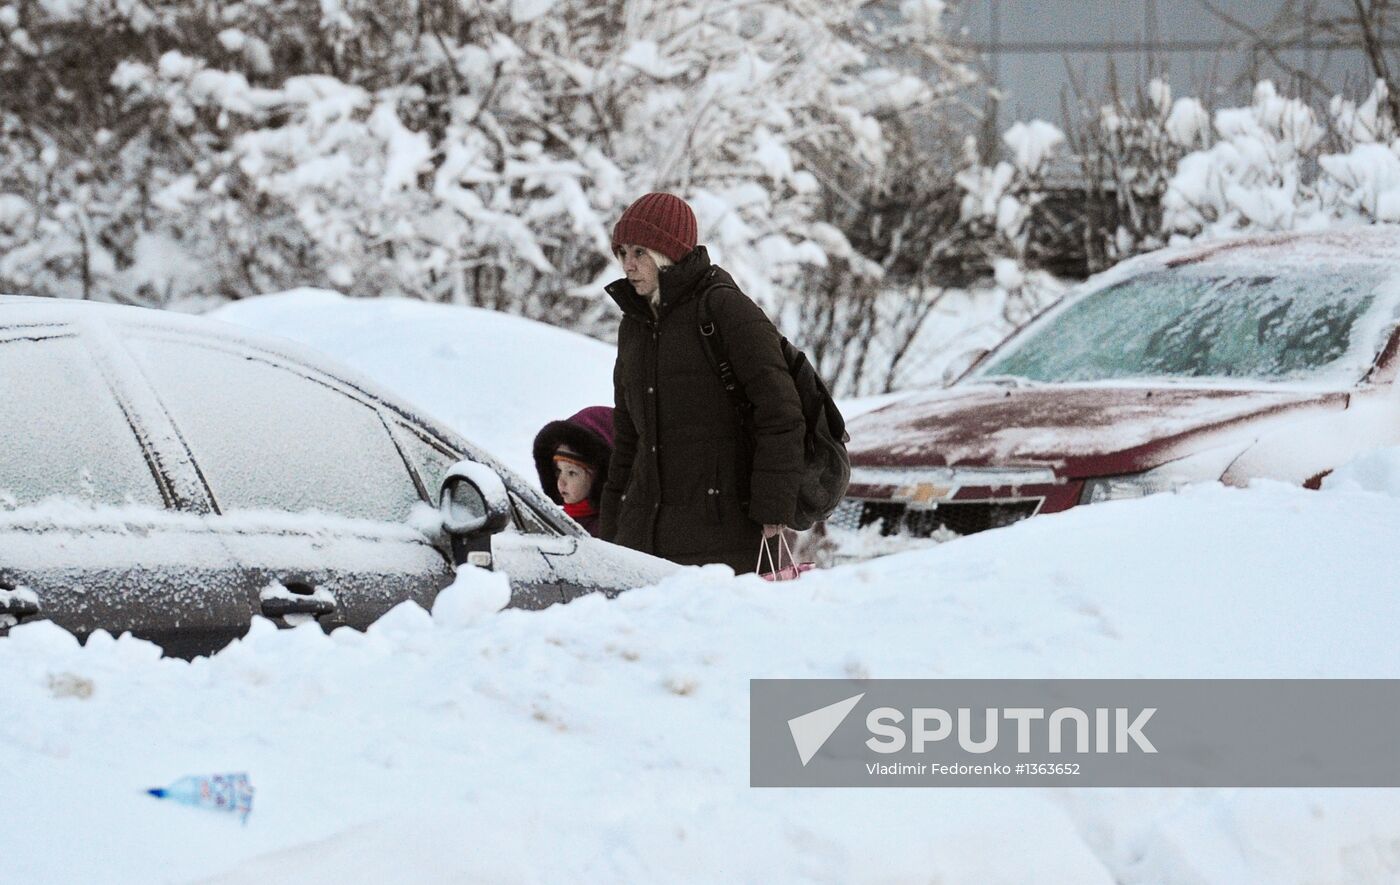 Aftermath of heavy snowfall in Moscow